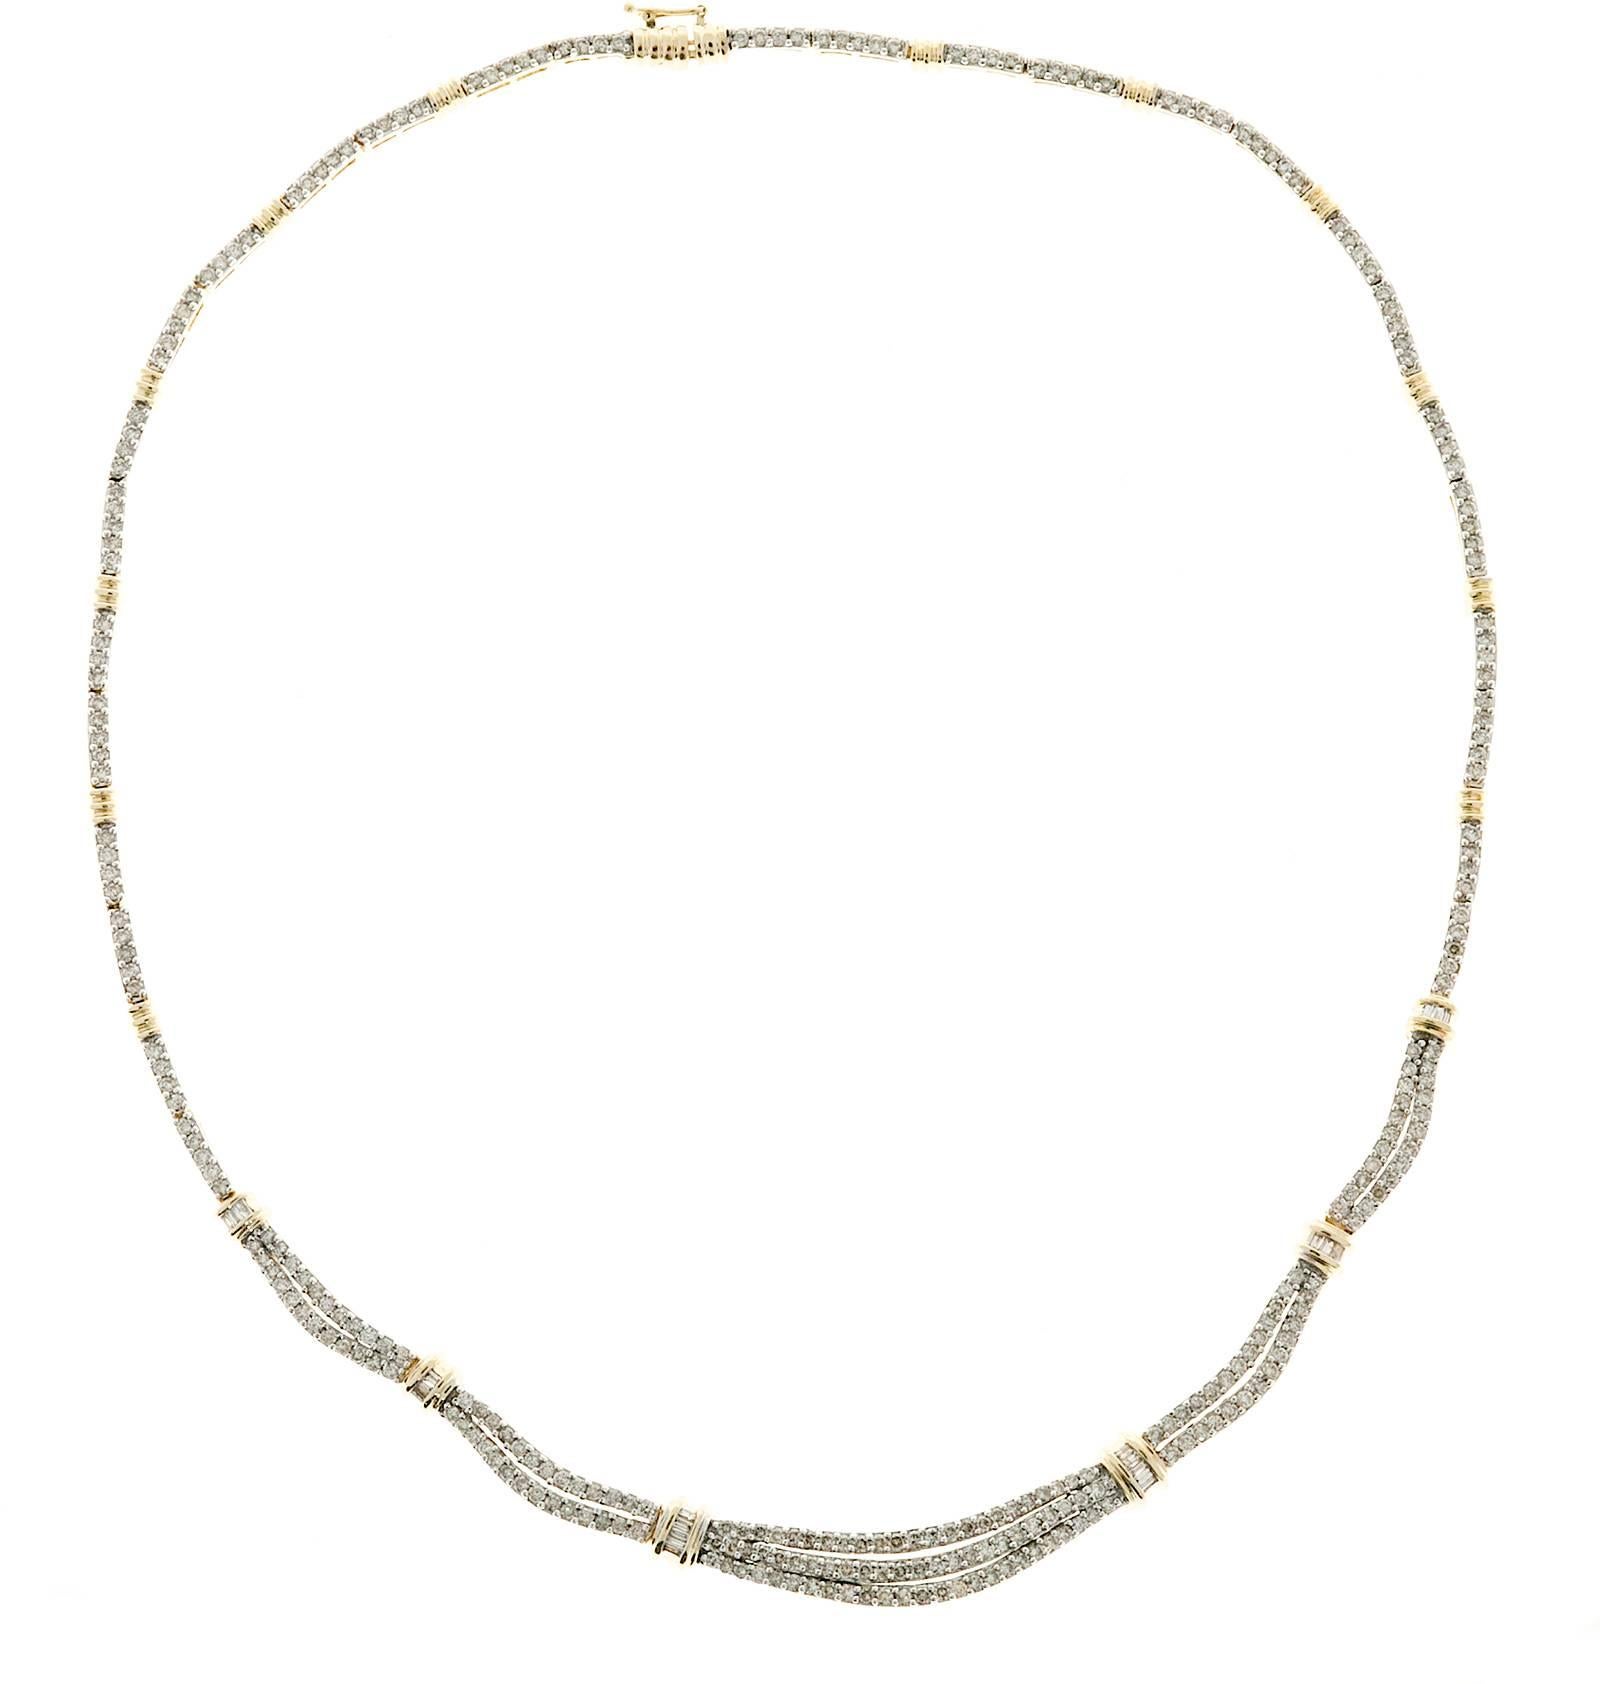 Three row diamond necklace. White gold diamond sections, yellow gold spacers.

327 round brilliant cut diamonds, approx. total weight 3.27cts, I, SI1 to I1
20 baguette cut diamonds, approx. total weight. 28cts, H - I, SI
14k White Gold
14k